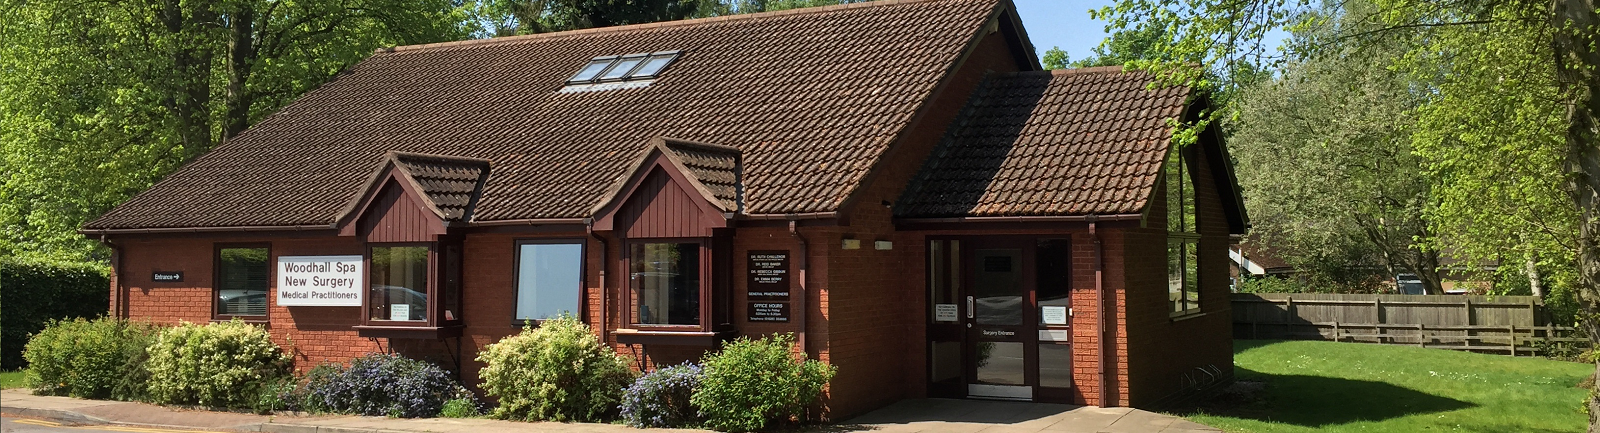 Advanced Care Practitioner | Woodhall Spa New Surgery